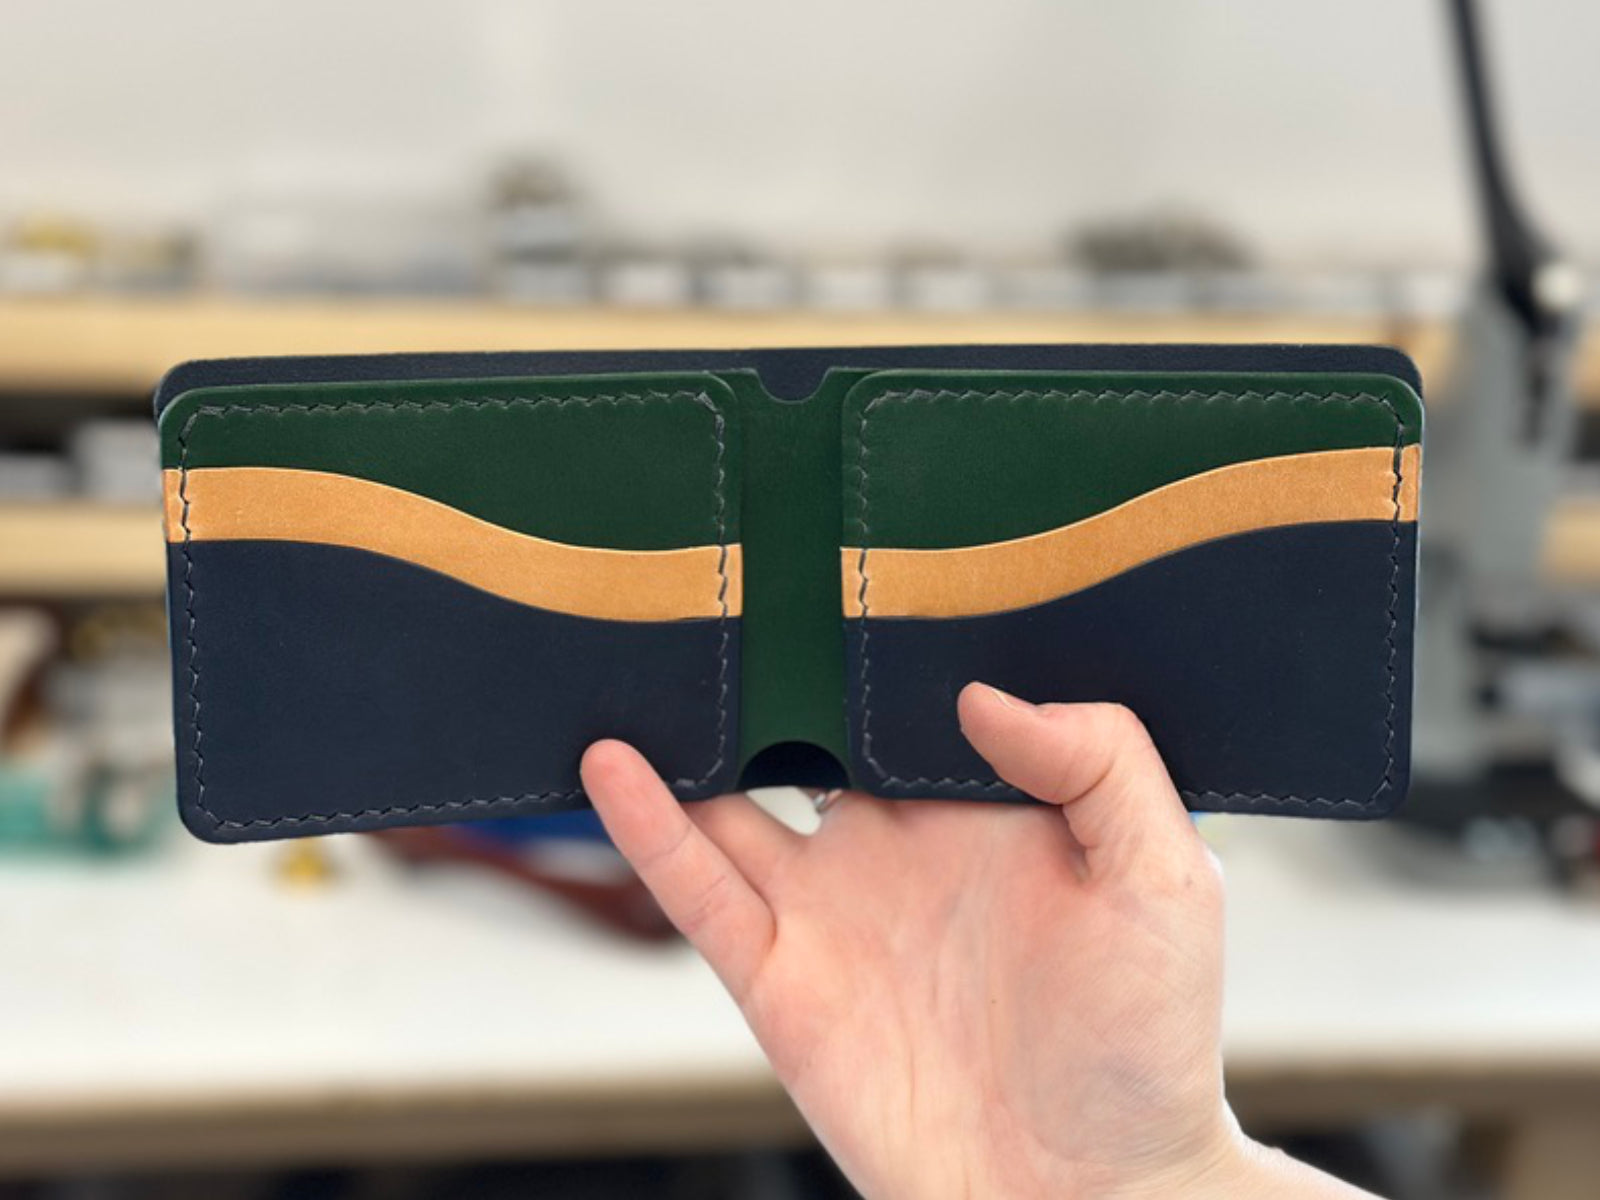 Build your own custom veg-tan leather wallet in navy, russet and pine 